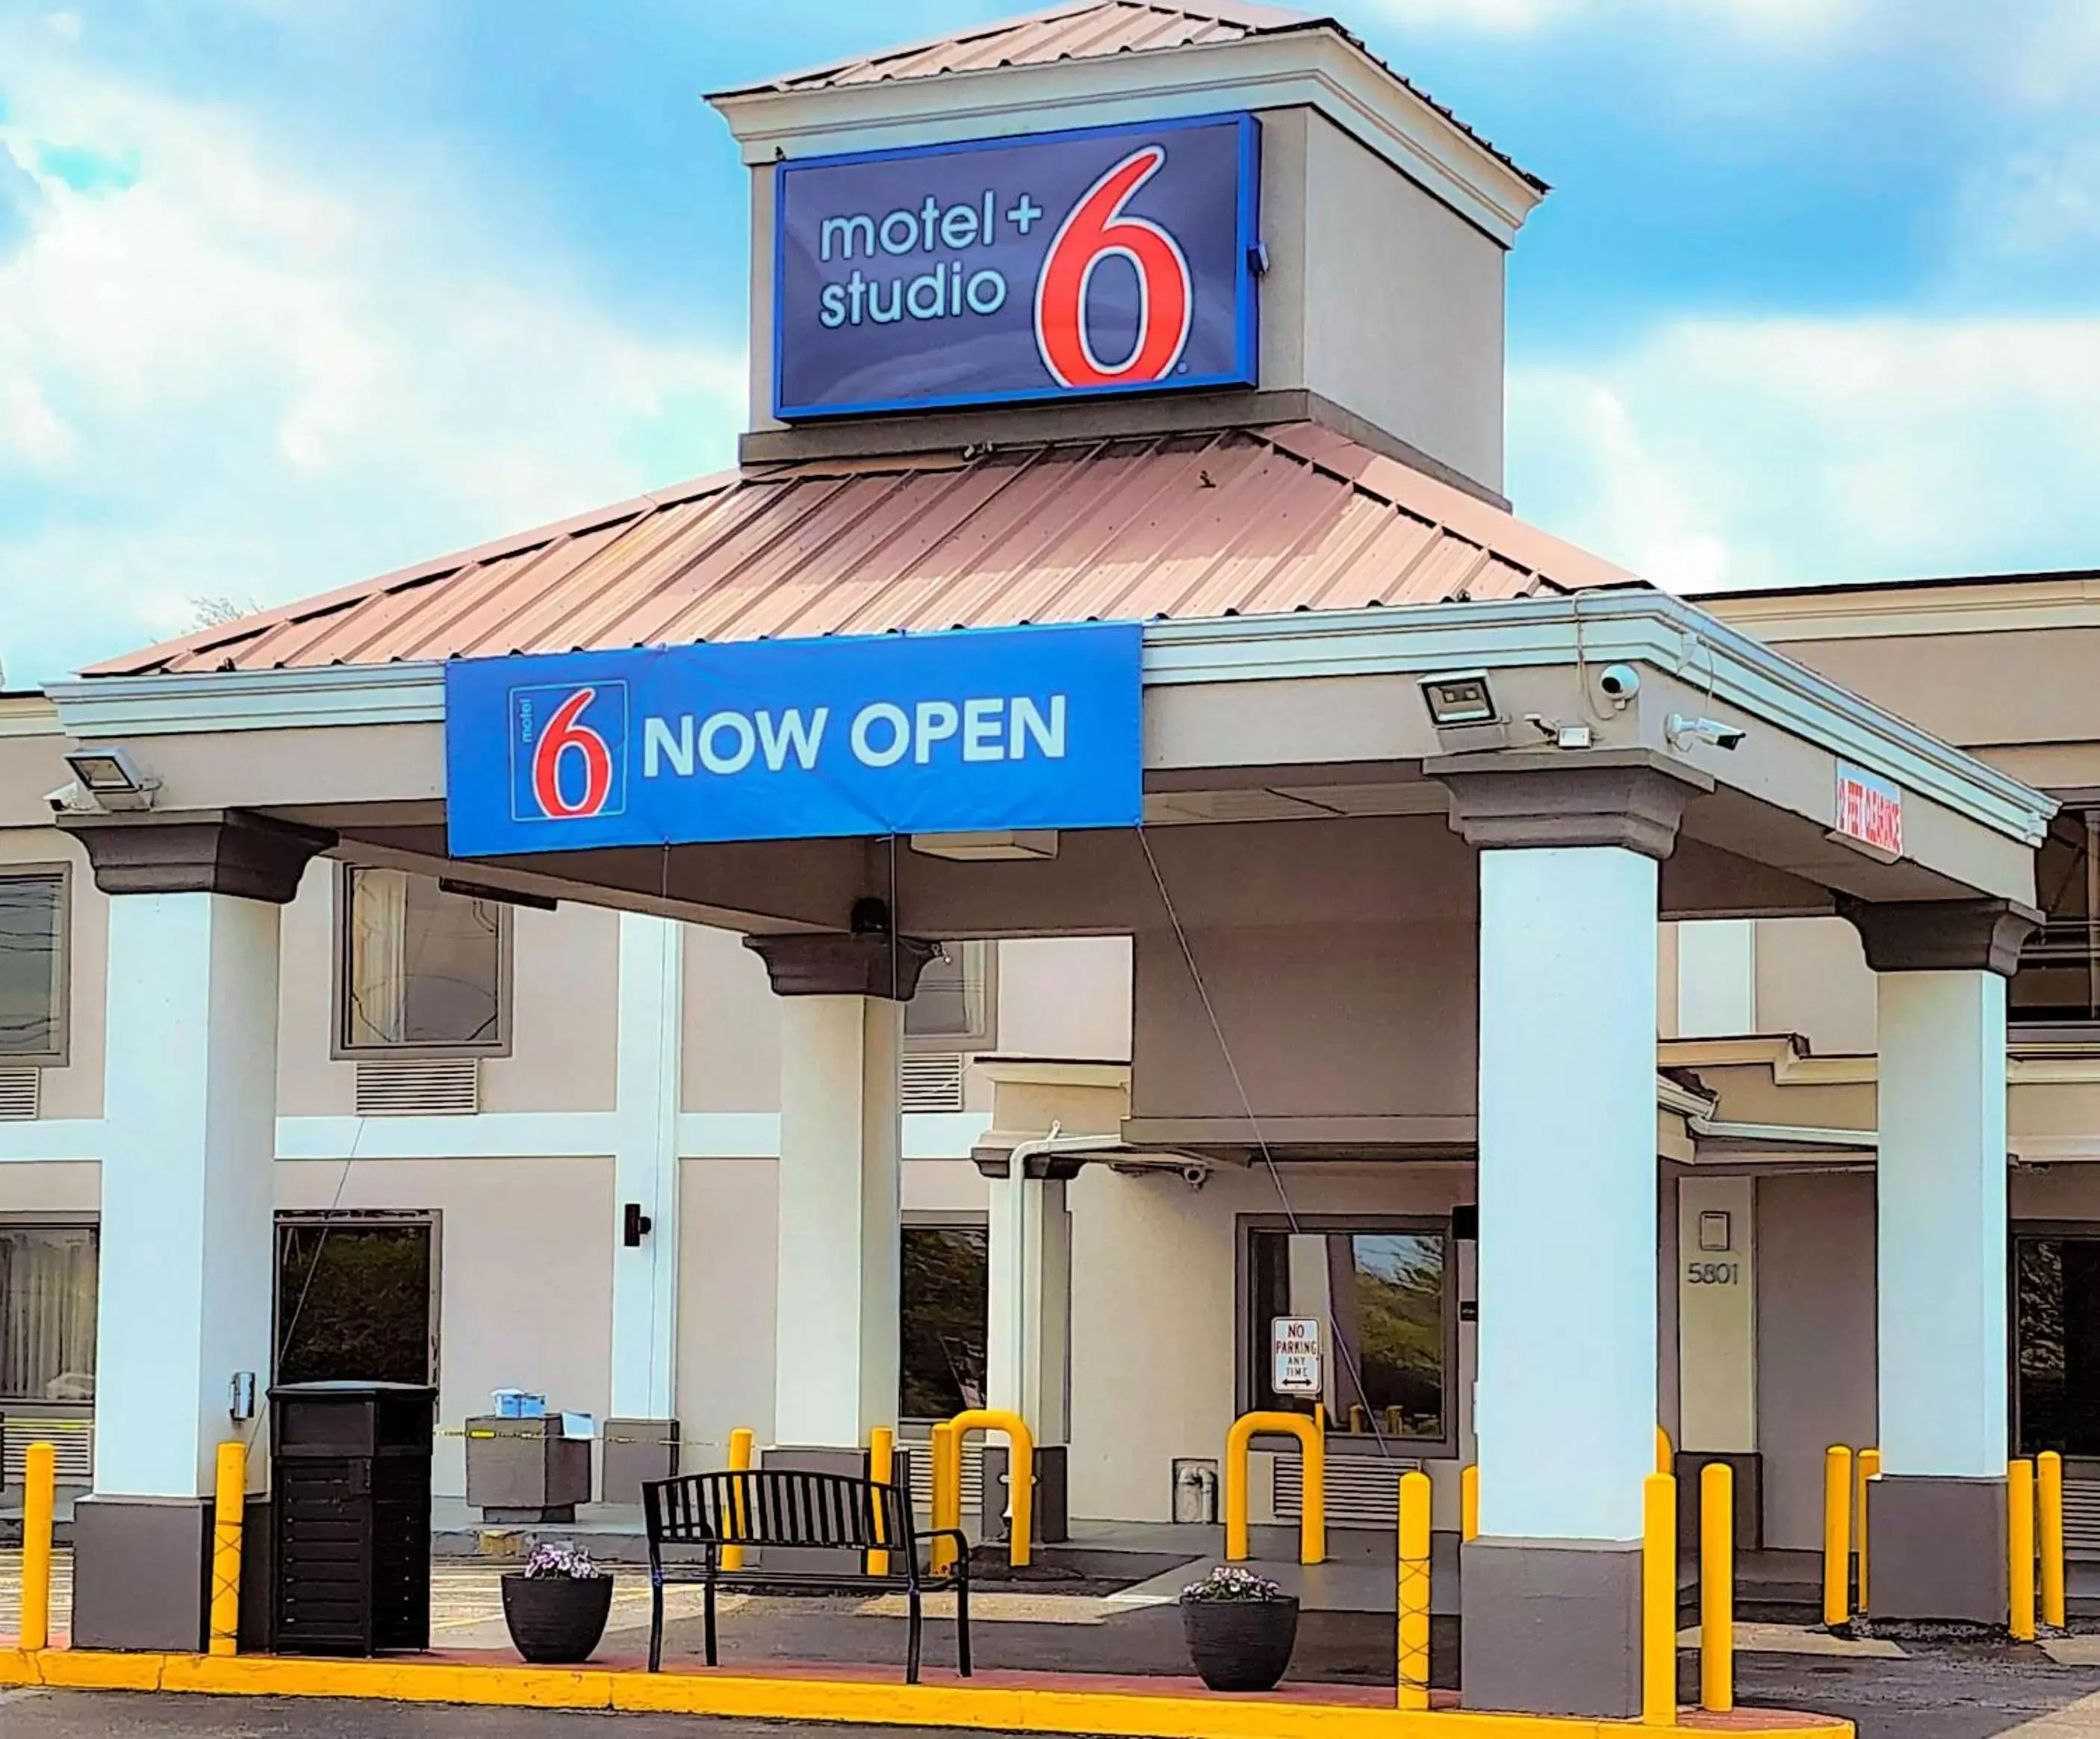 Property building in Motel 6 Catonsville MD Baltimore West